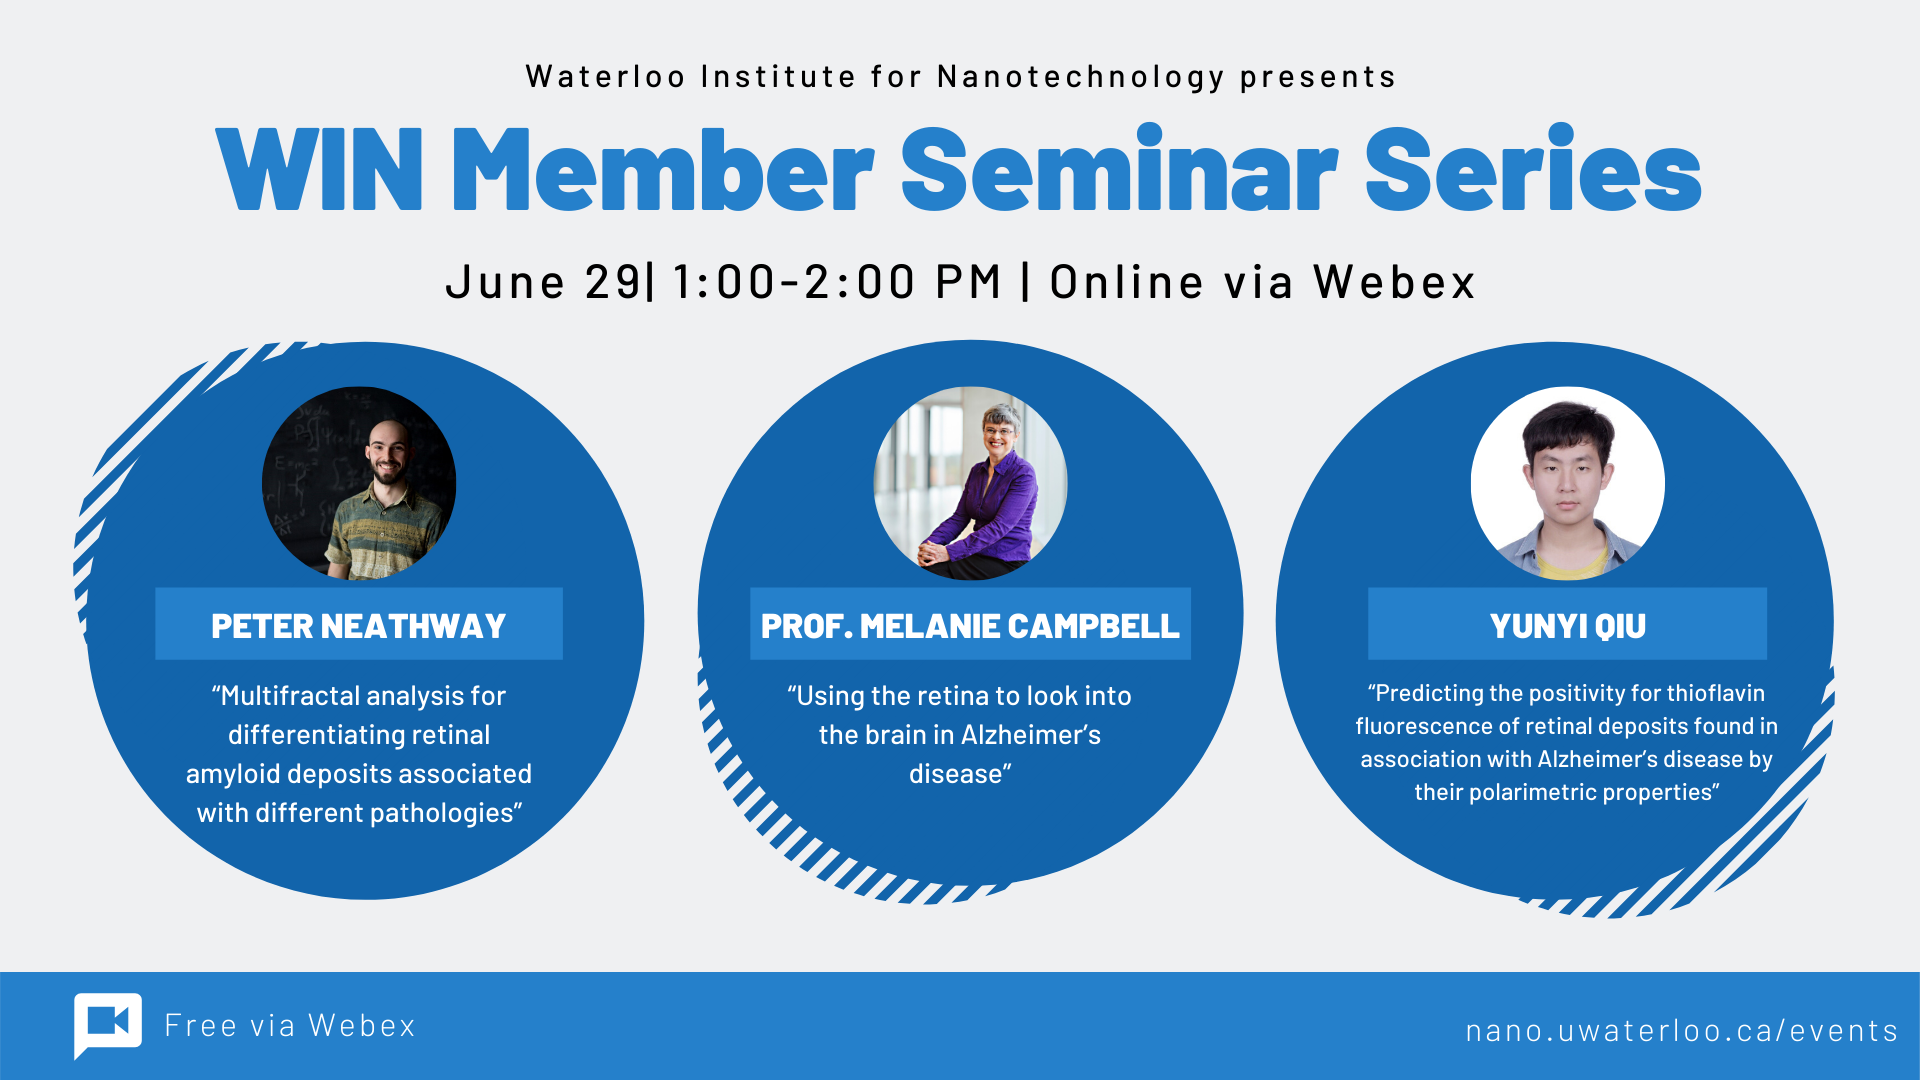 Event poster with images of all 3 speakers and their talk titles on June 29th at 1 pm on WebEx.